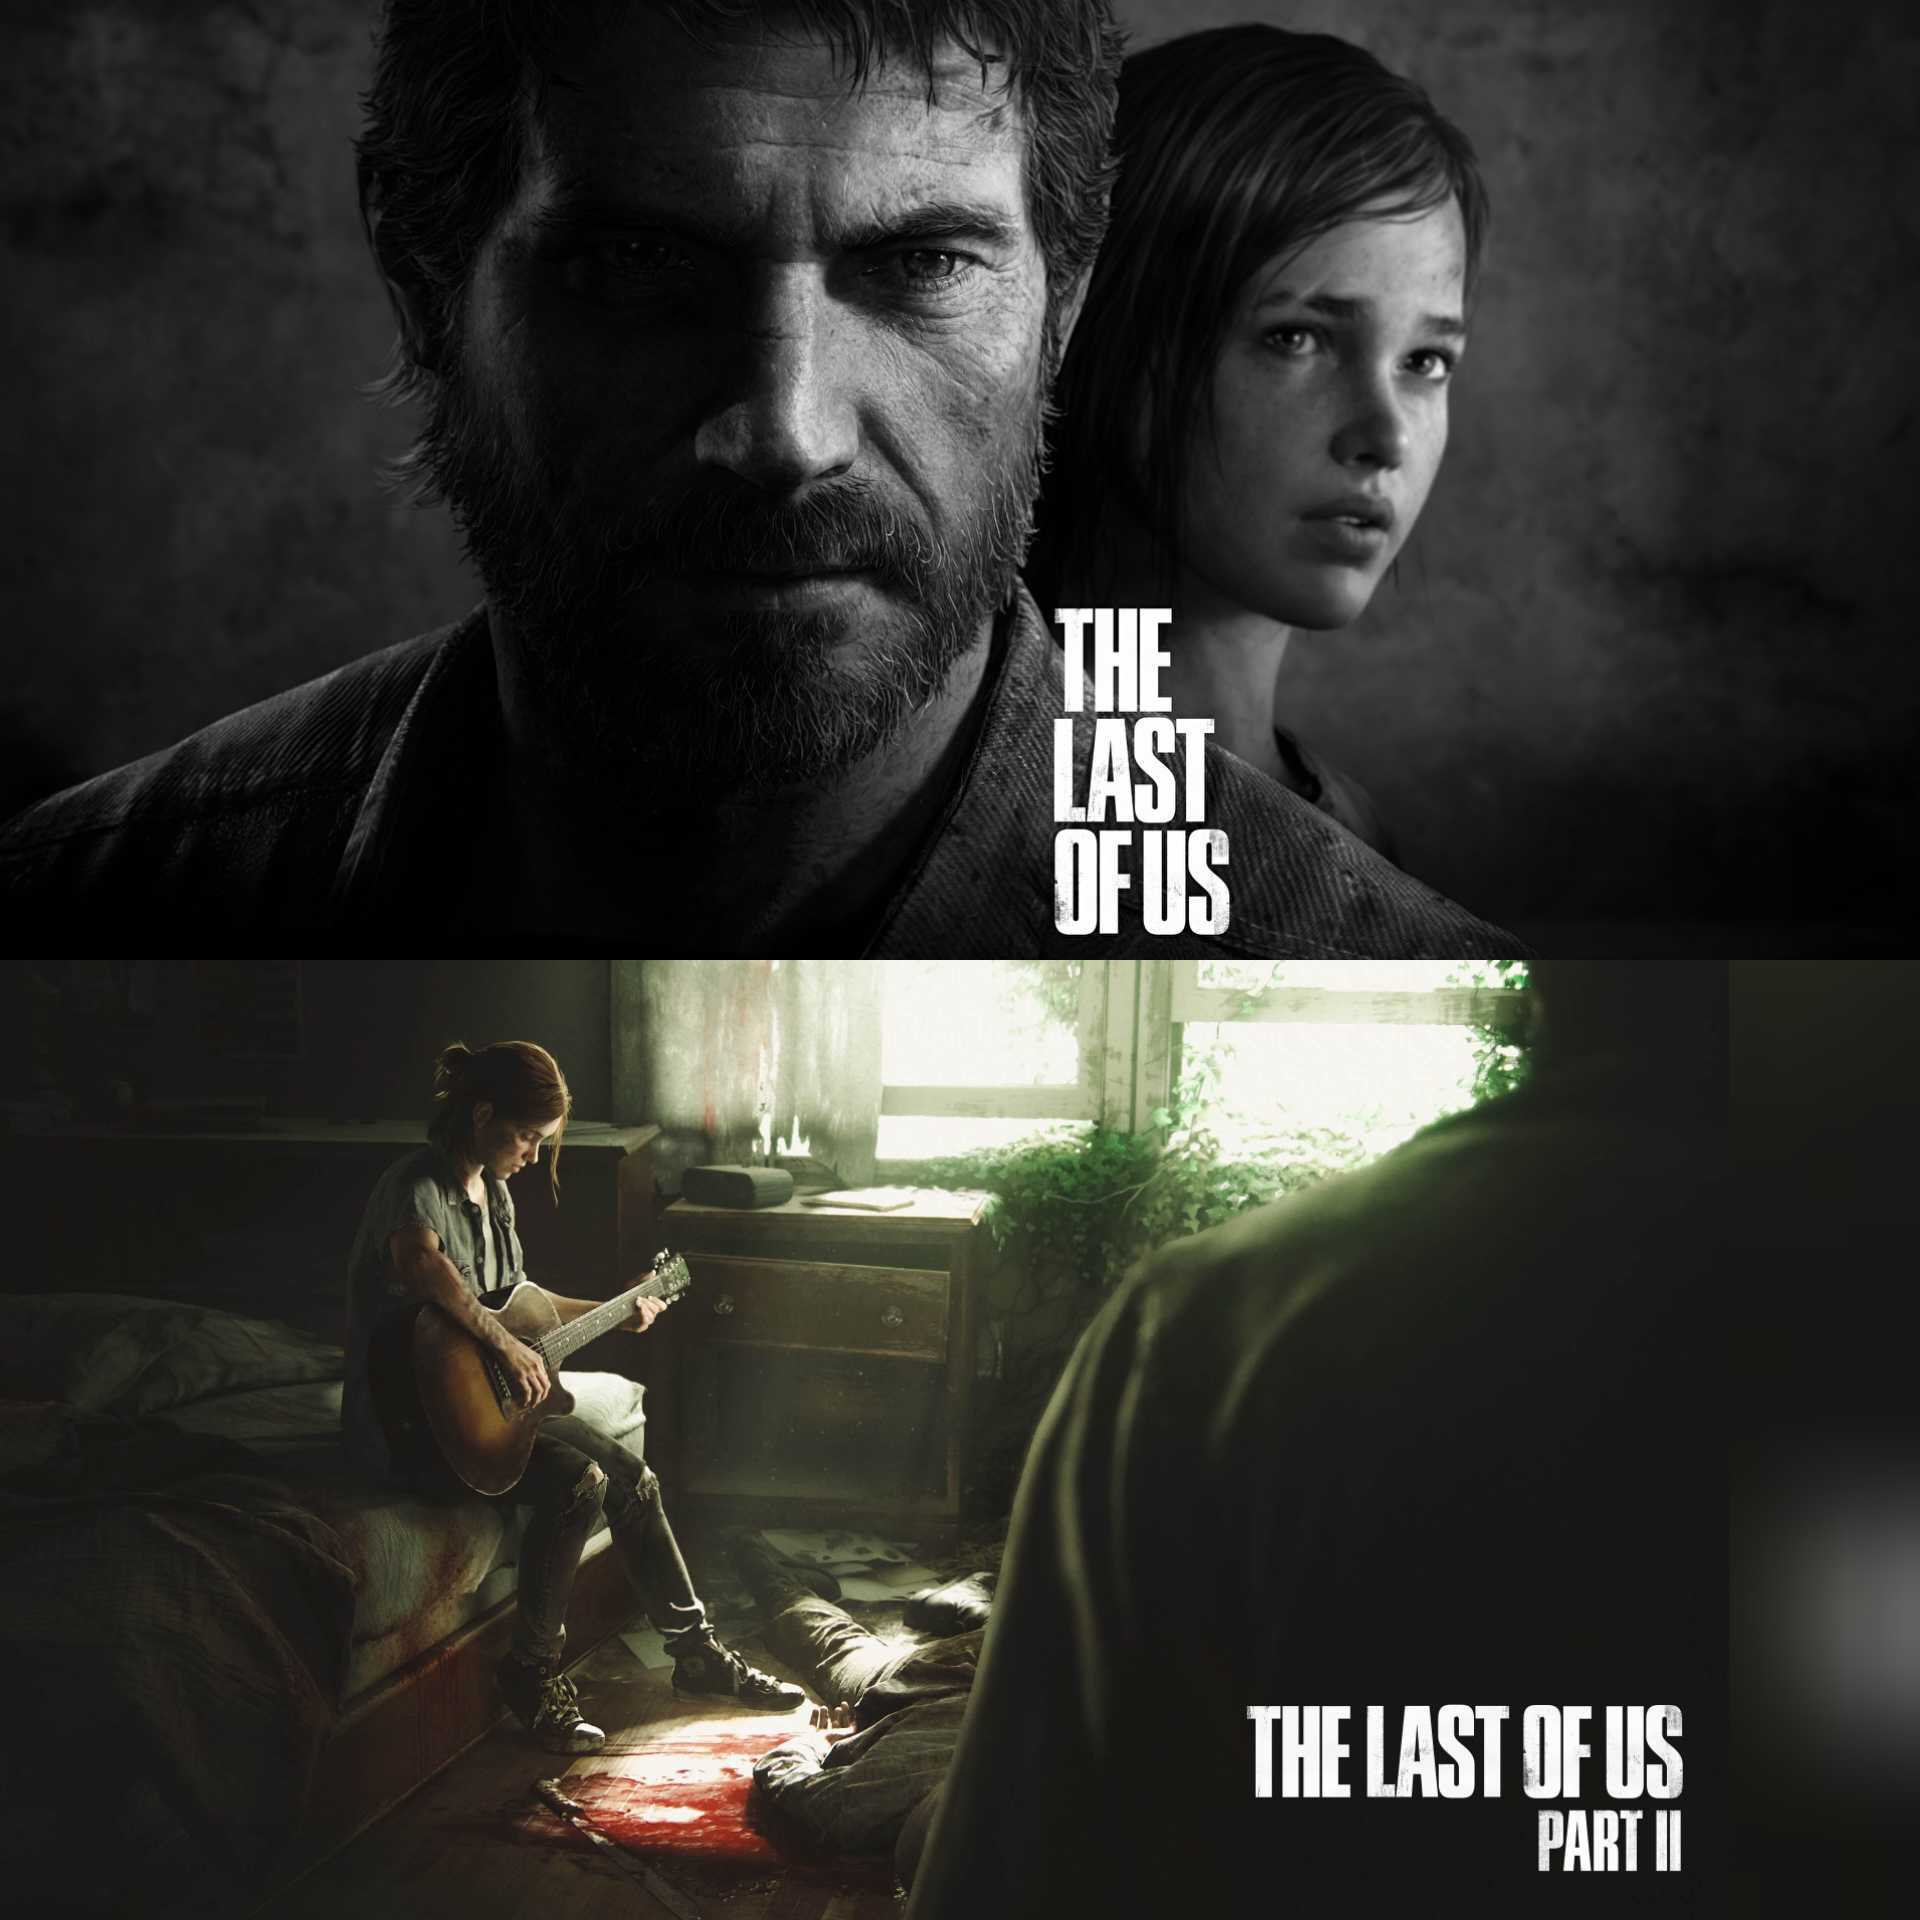 Last of us 1 and 2